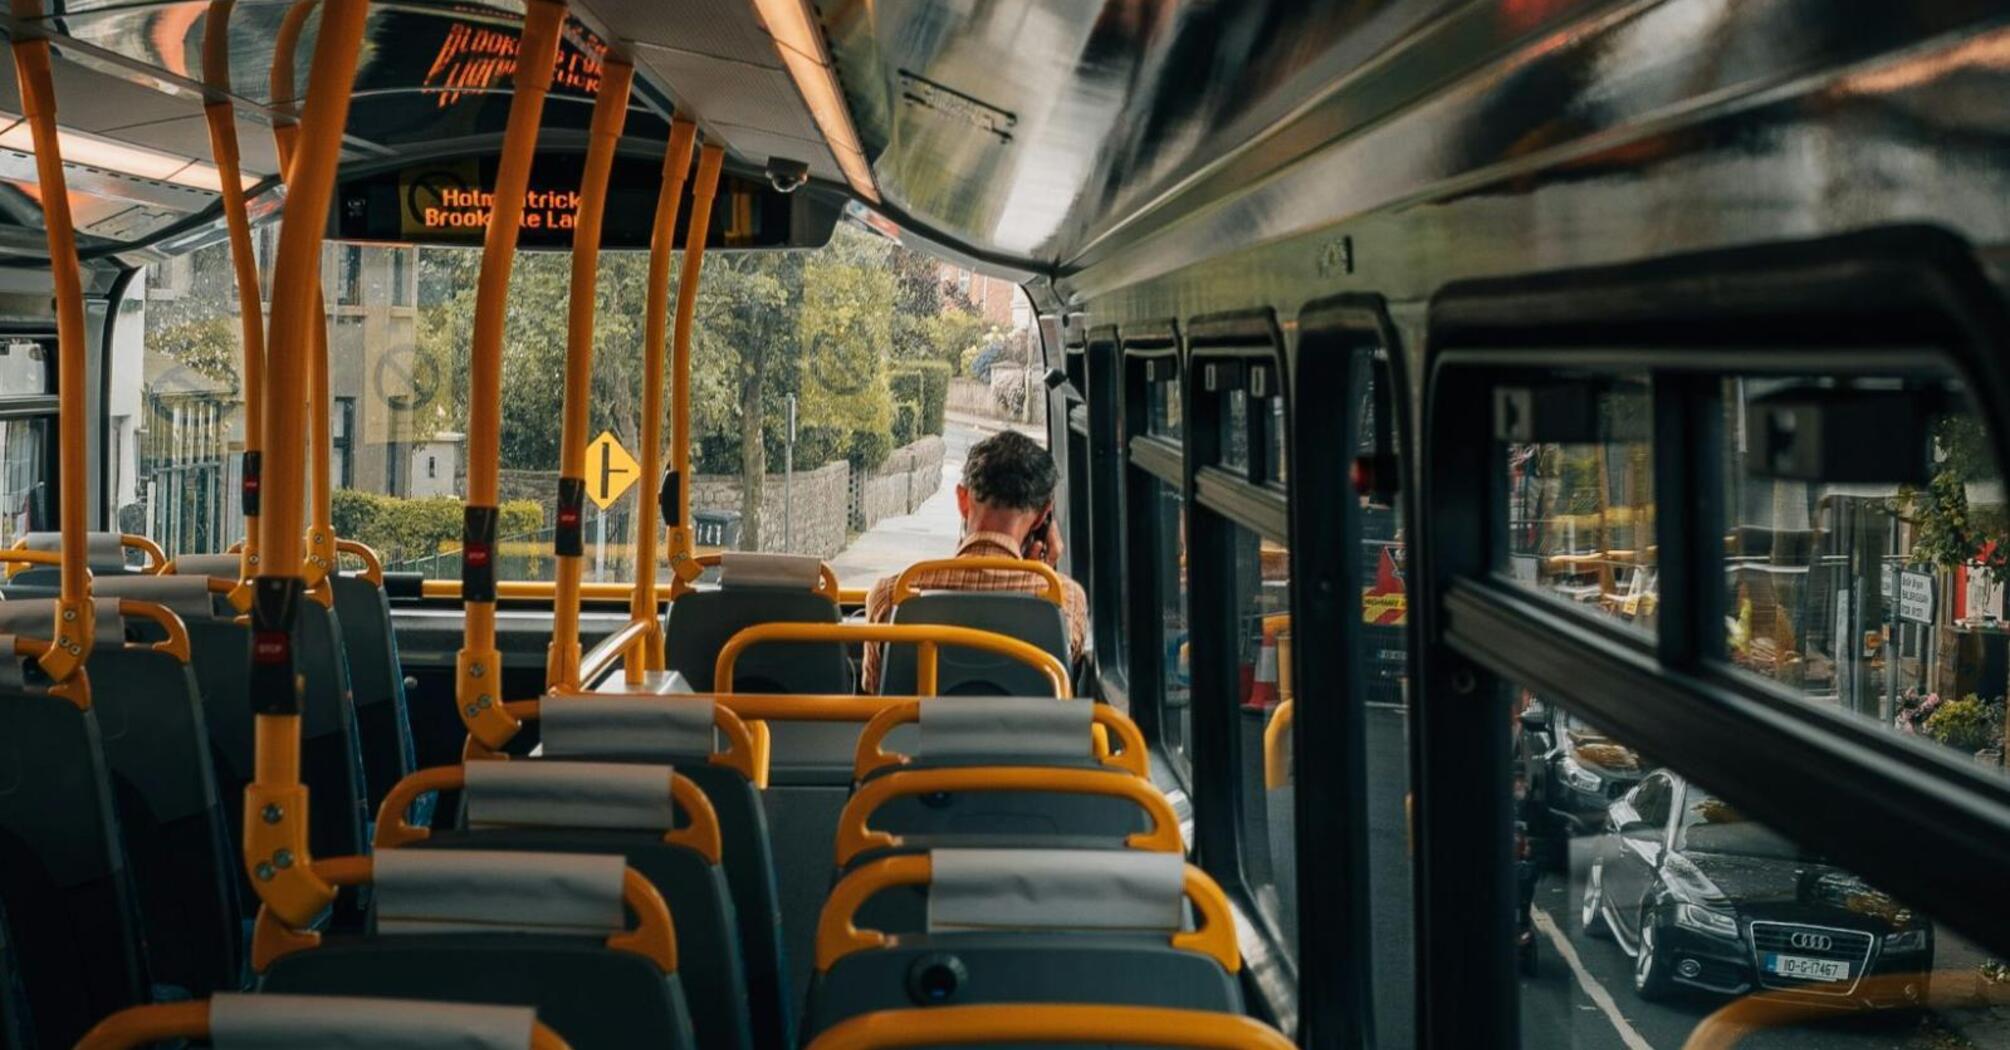 Interior of a bus with empty seats and a passenger in the distance